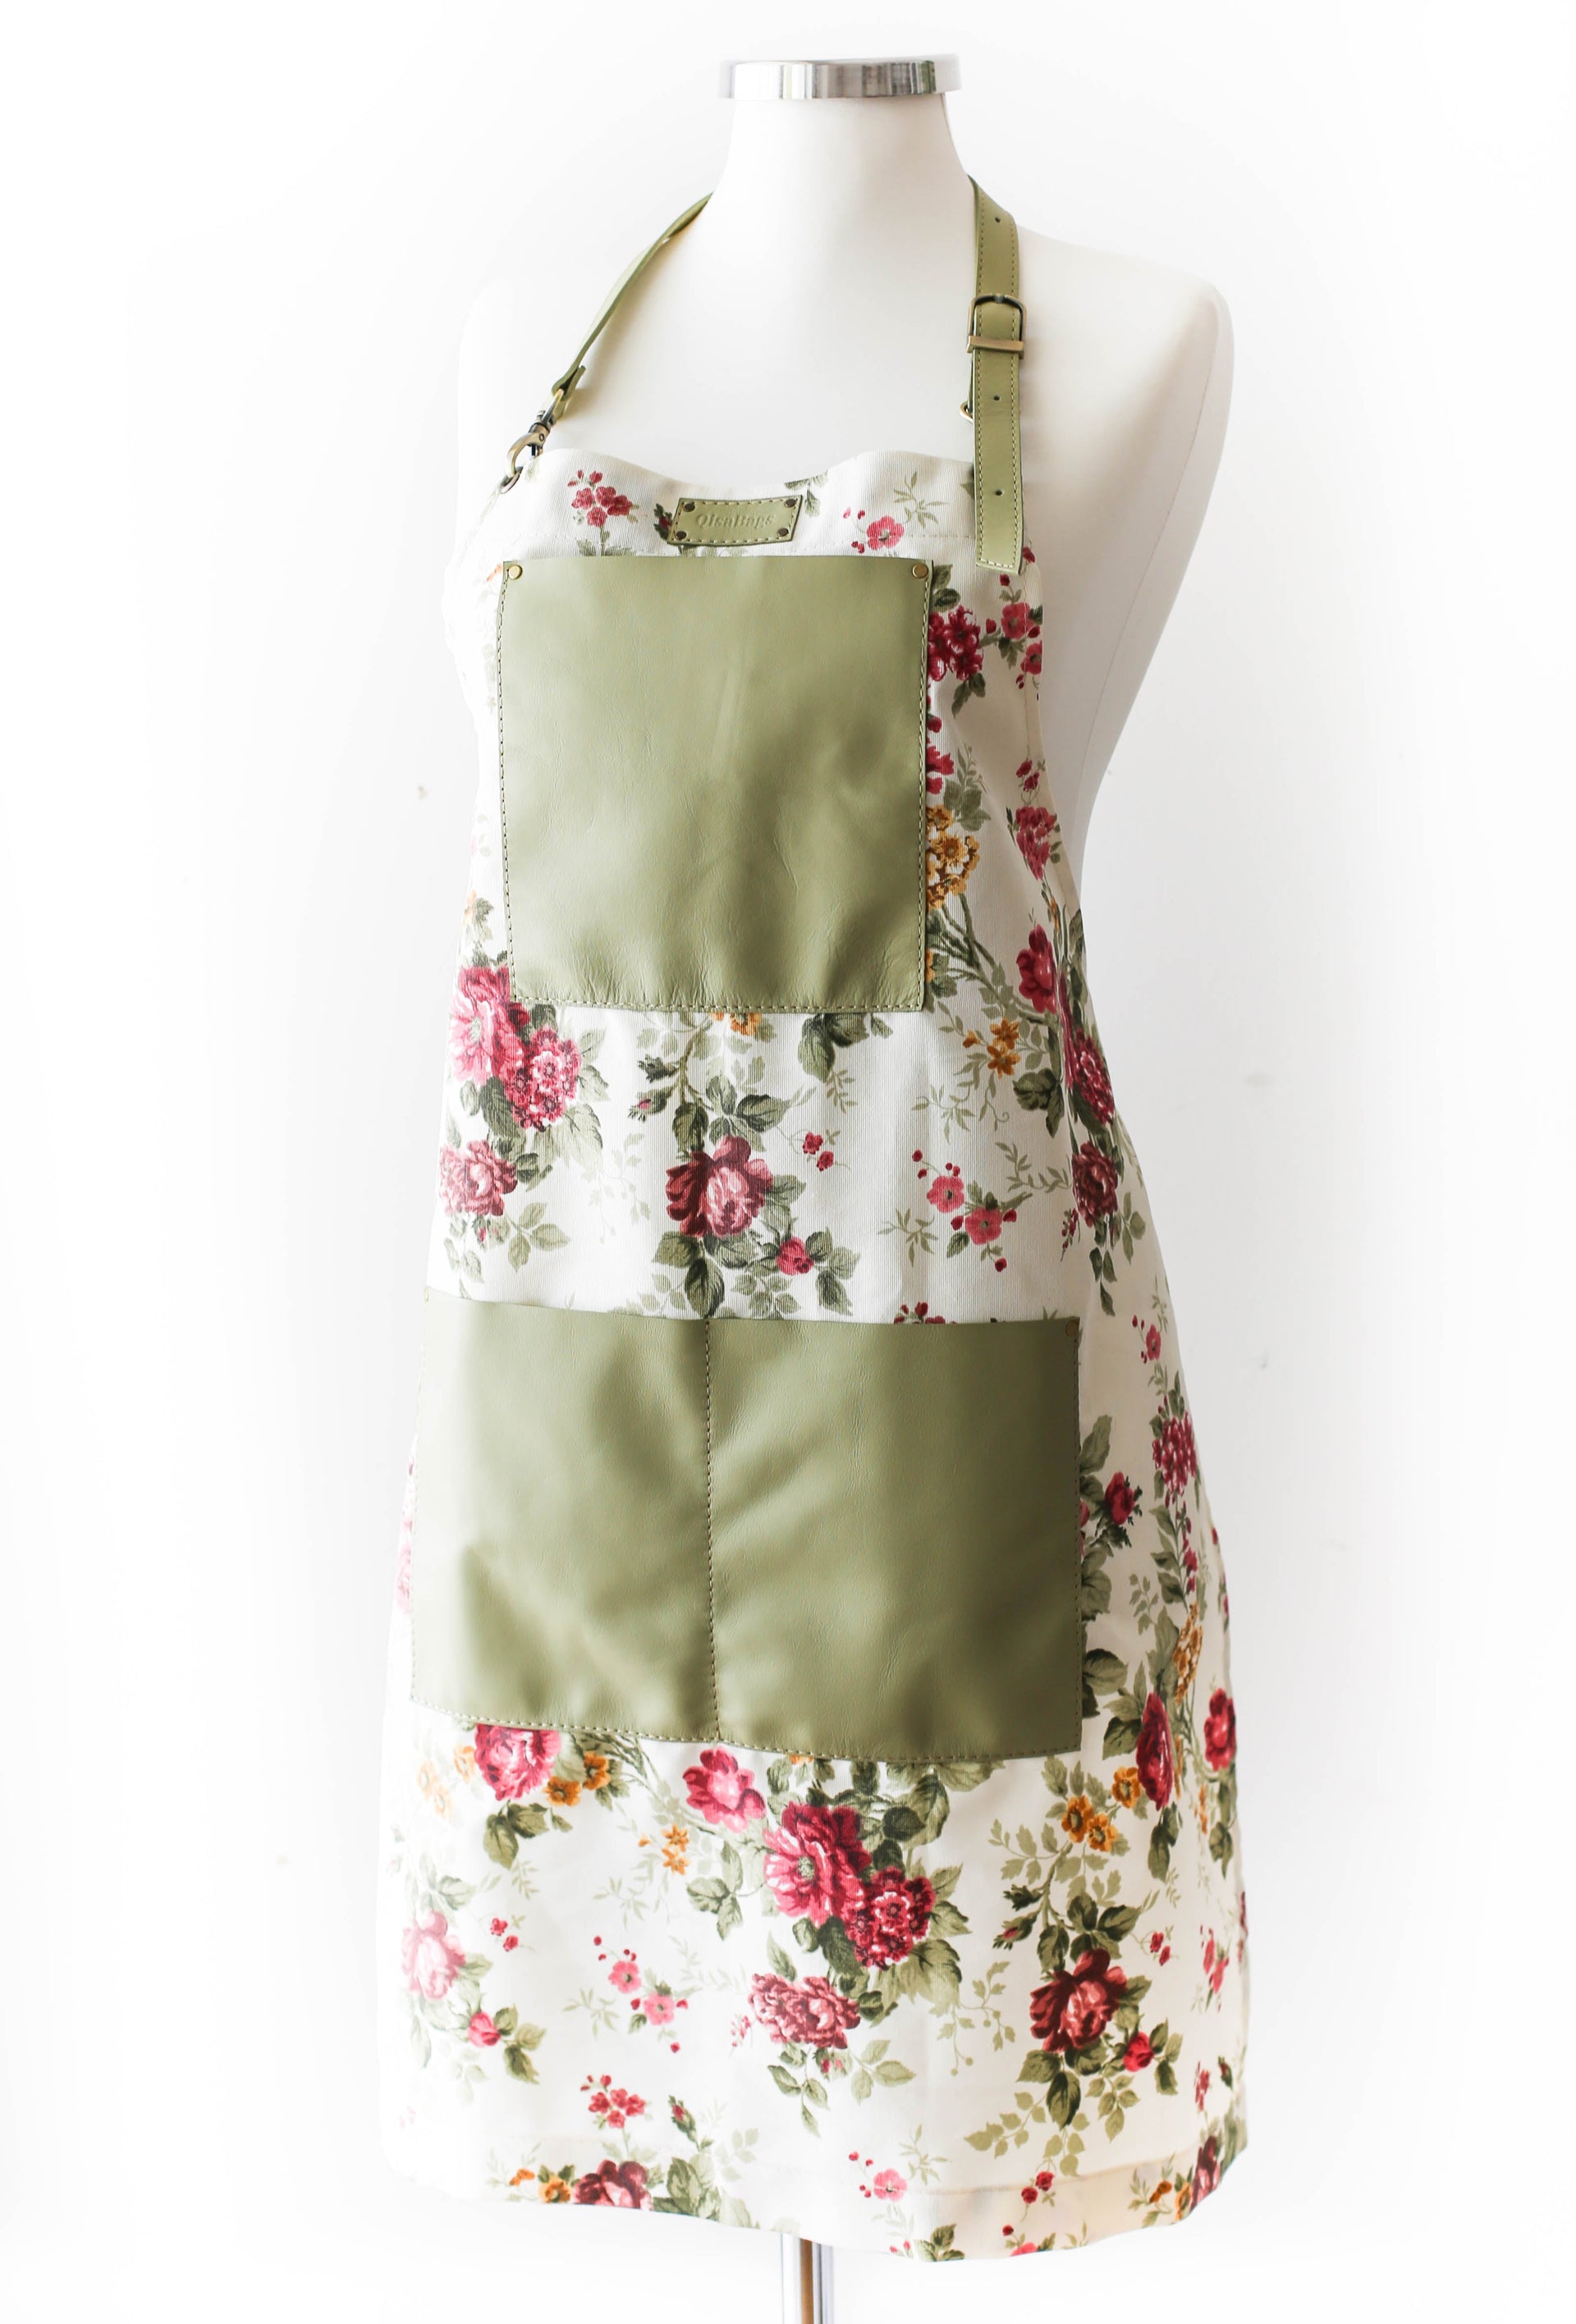 apron with leather straps